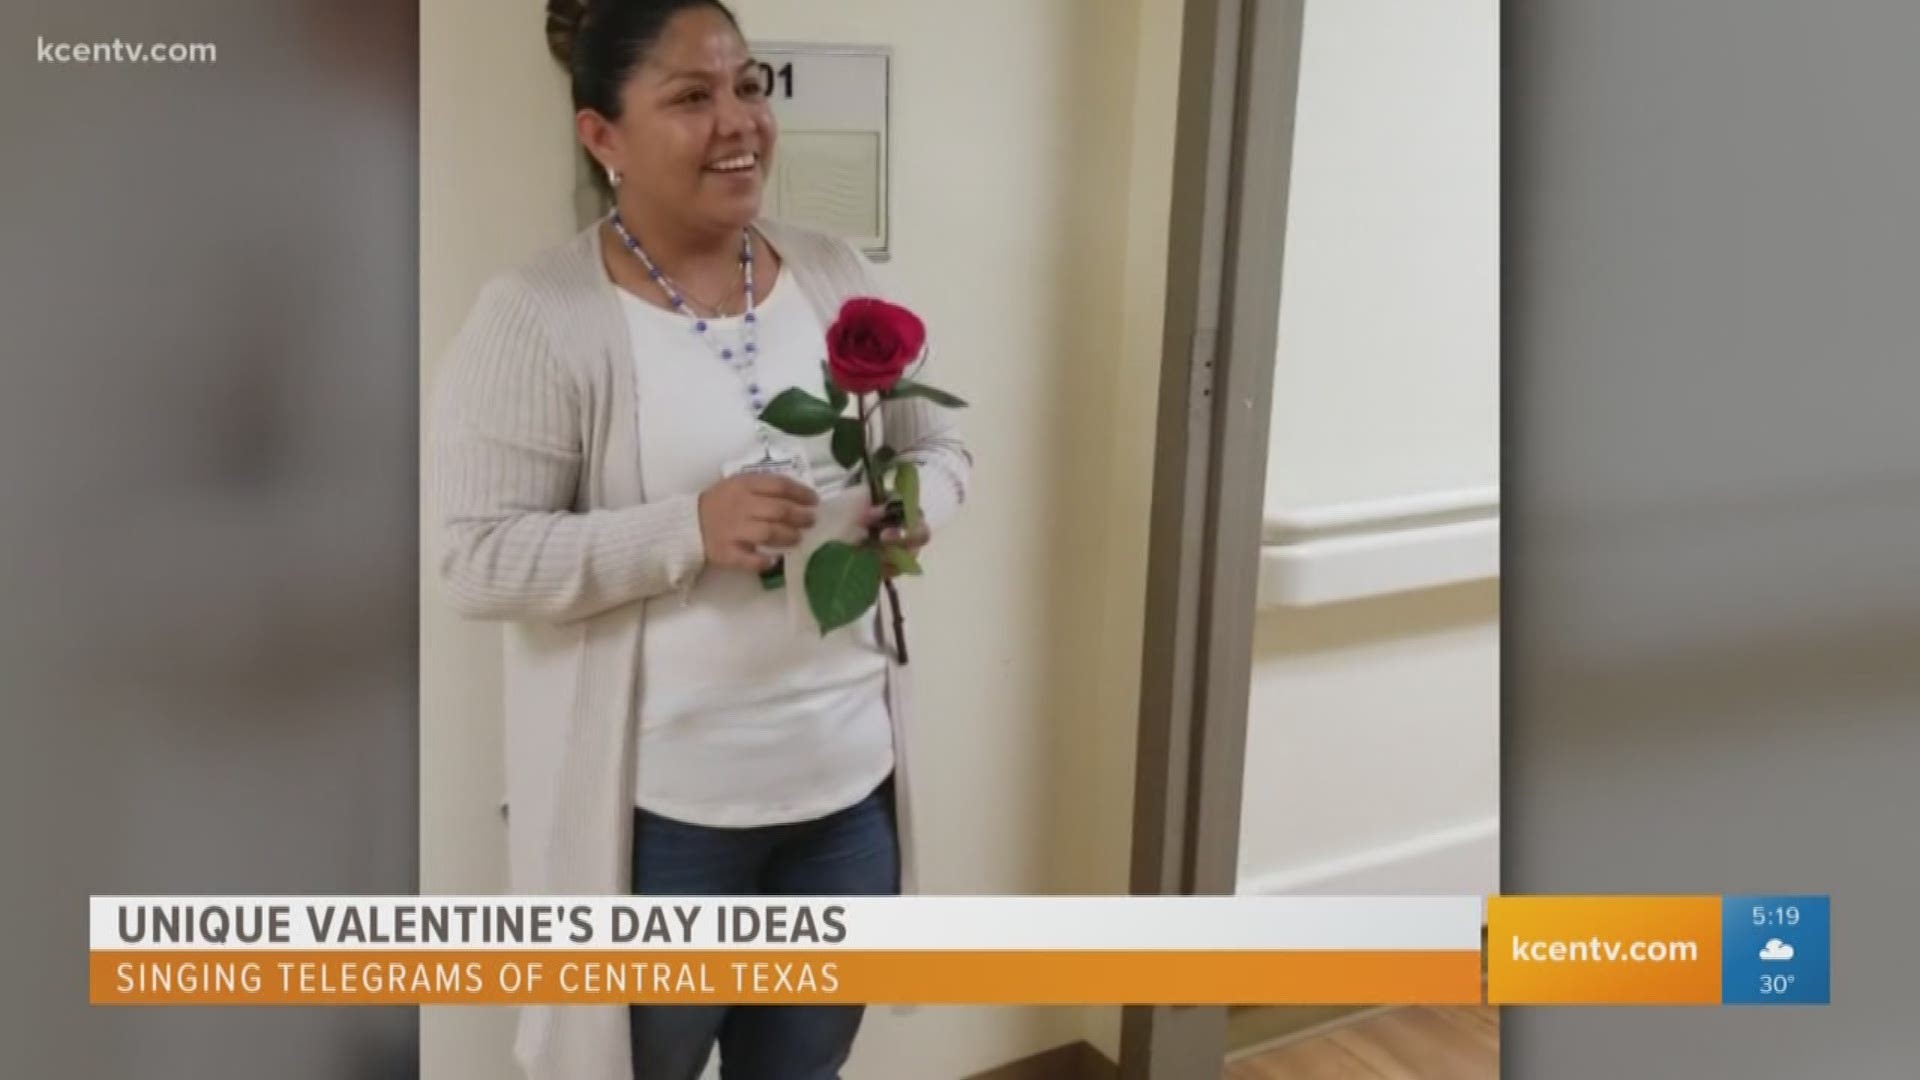 Singing Telegrams of Central Texas deliver a song to that special someone on Valentine's Day and any day of the year.